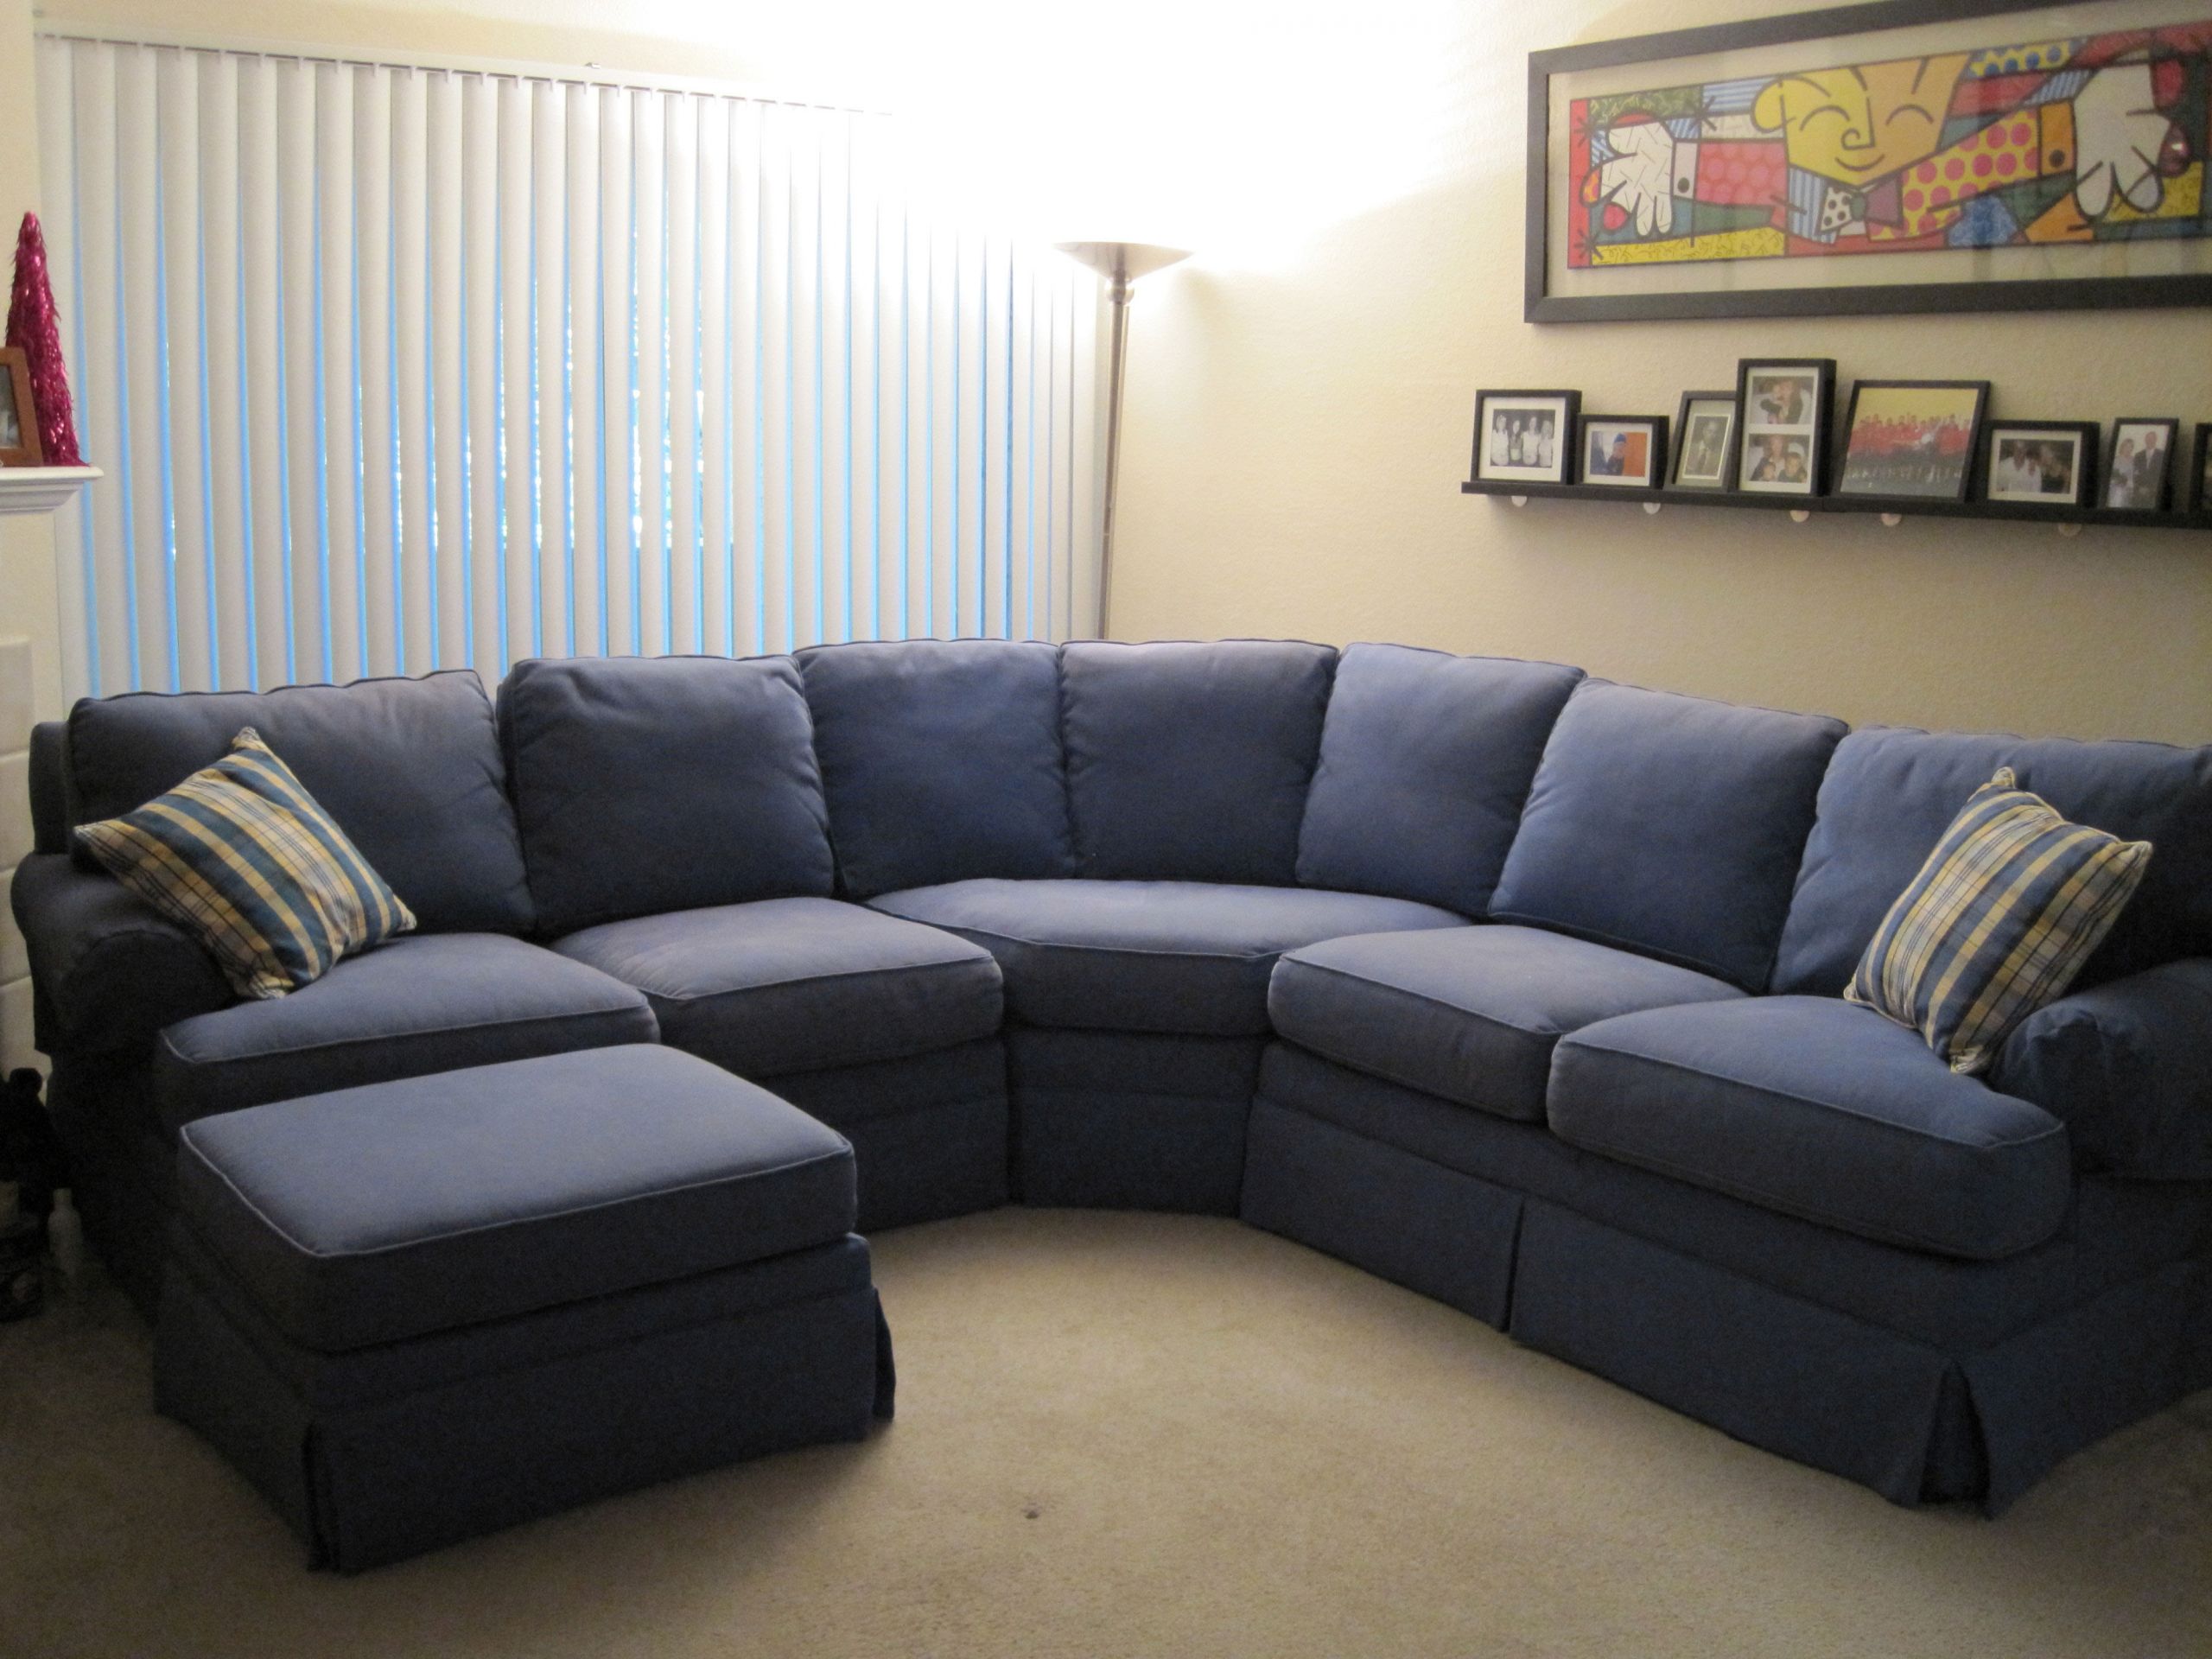 Sofas For Small Living Room
 Living Rooms with Sectionals Sofa for Small Living Room